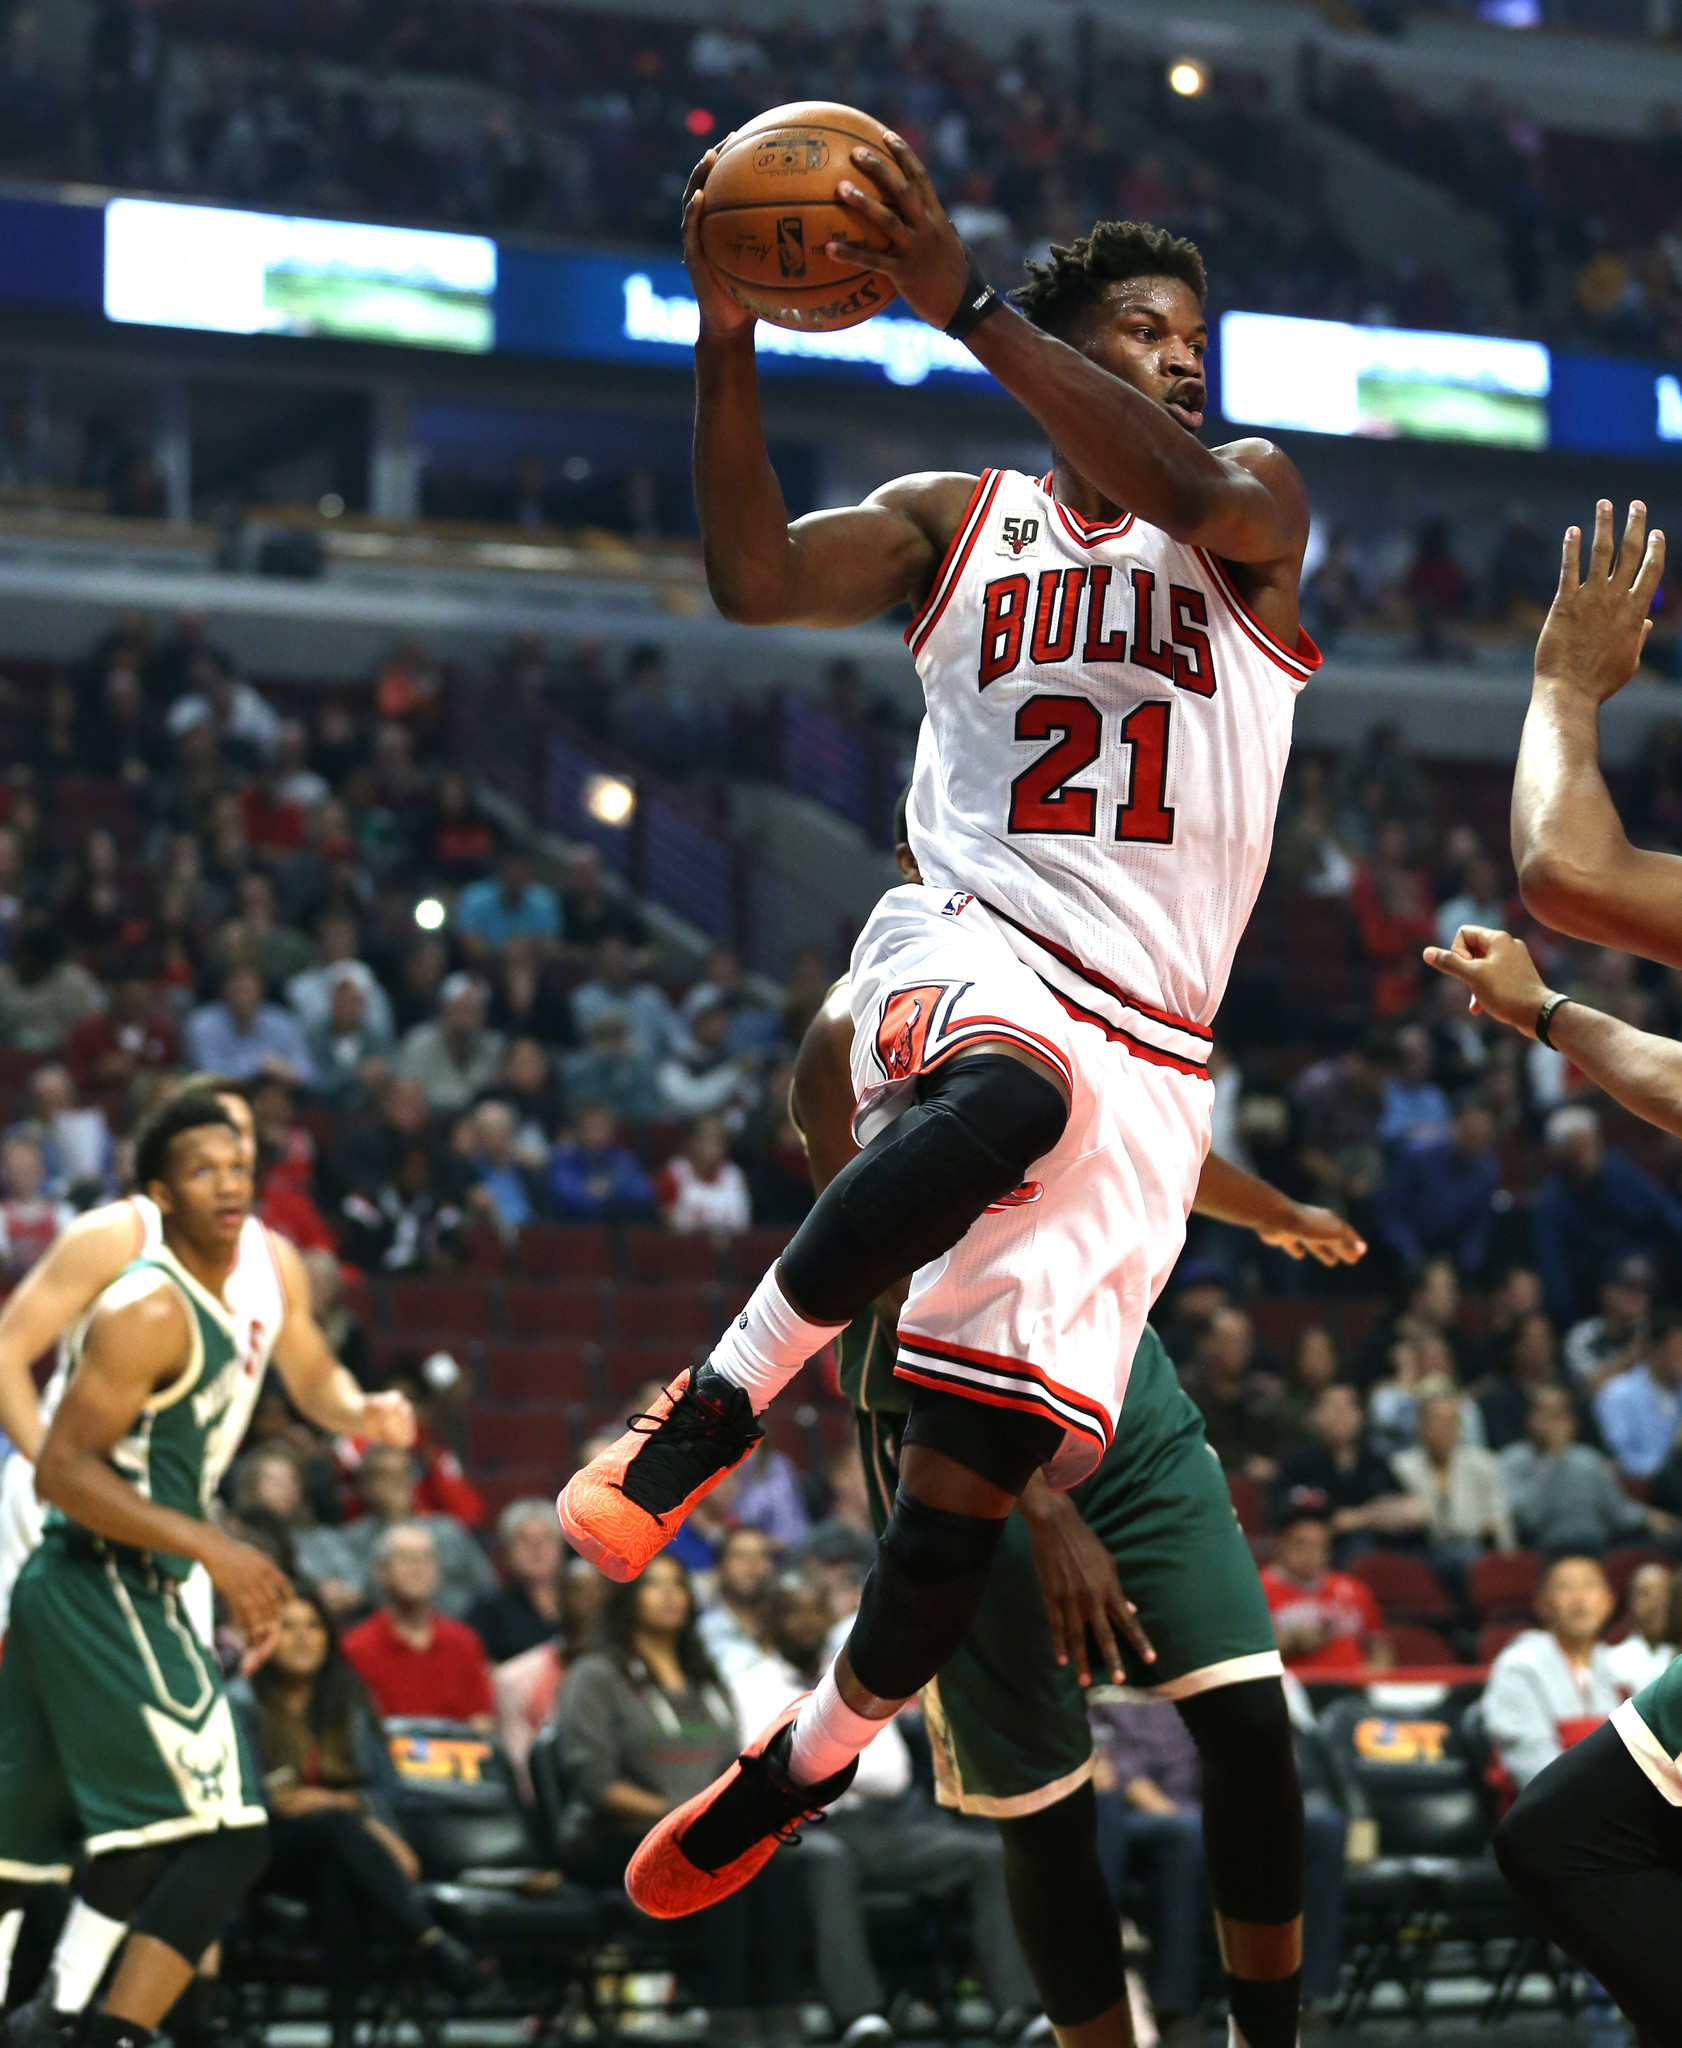 Same old Jimmy Butler, exhibition game or not - Chicago Tribune